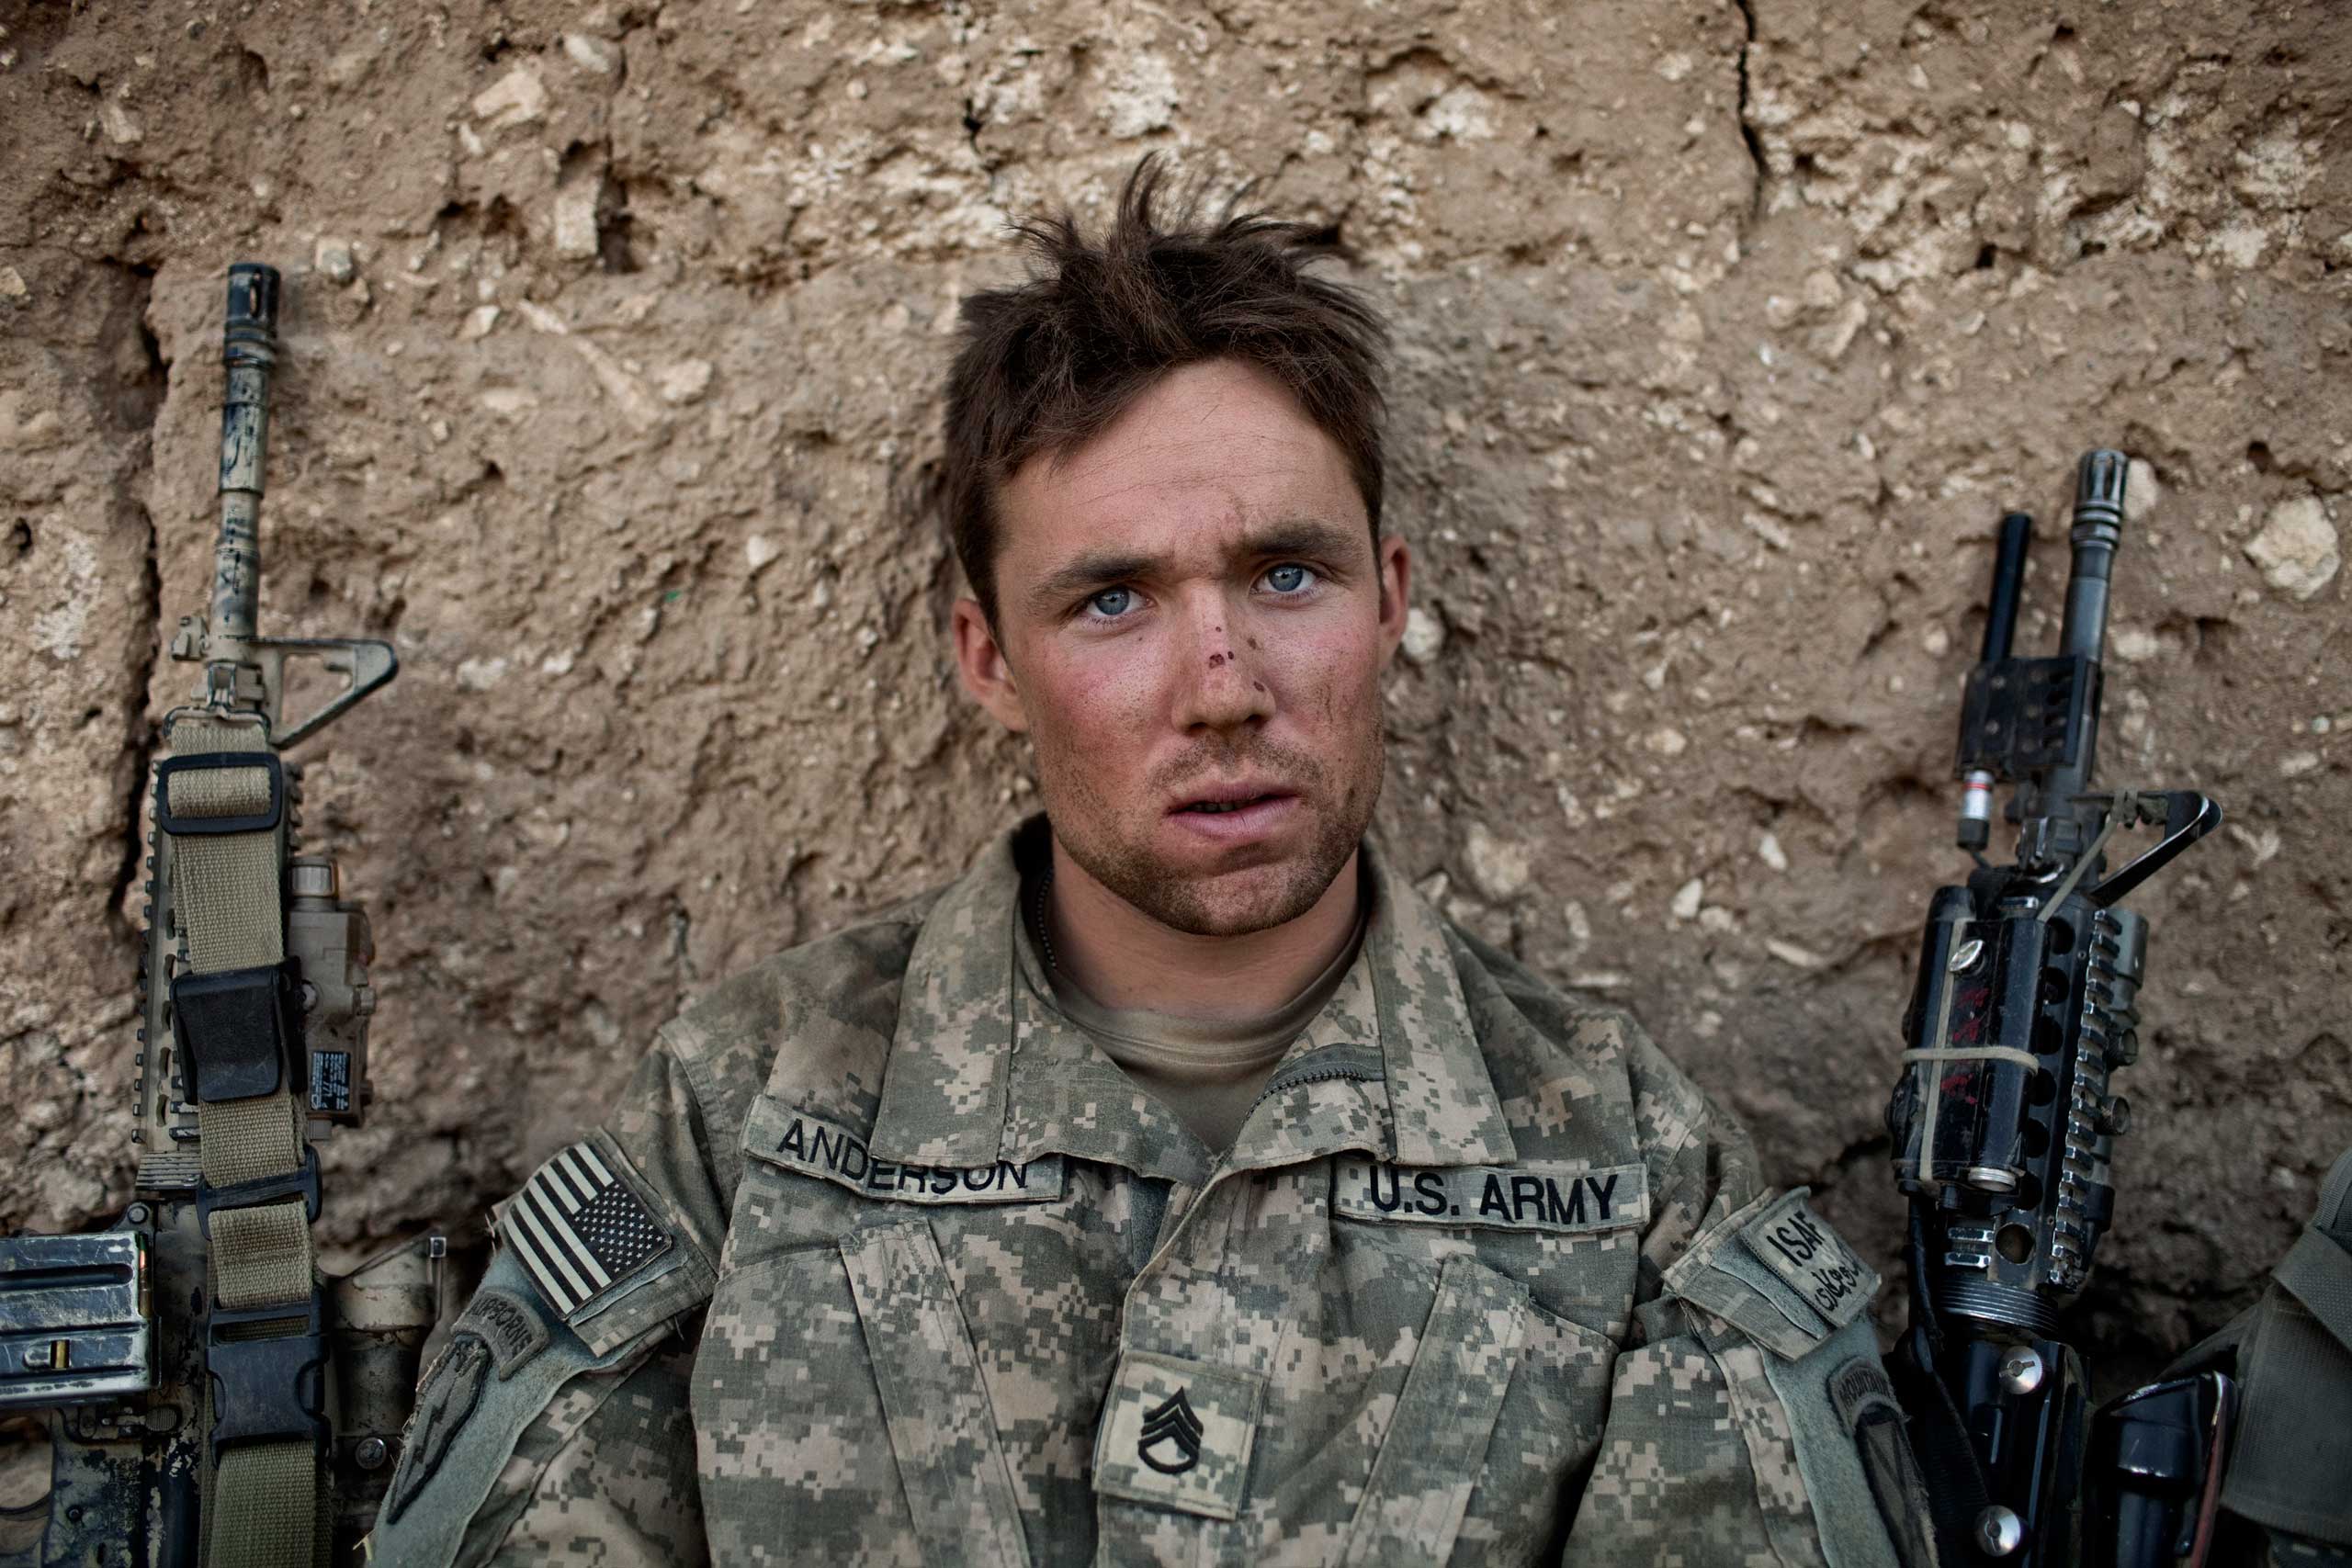 Army Sergeant Cody Anderson.
                              Adam Ferguson, Sept. 11, 2009. Tangi Valley, Afghanistan.
                              
                               In 2009, on a military operation in Afghanistan’s notorious Tangi Valley, I made this picture of U.S. Army Sergeant Cody Anderson. Six months later, after he retuned home, he was found dead in his apartment in Watertown, N.Y. It wasn’t officially called a suicide, but Anderson had been diagnosed with PTSD and was struggling with life at home. Anderson had served in Iraq also, so he knew the backwaters of America’s wars intimately. There was much Anderson couldn’t reconcile about the U.S. mission in Afghanistan, and he wasn’t scared to tell me about it. If I made a picture that epitomizes the ‘1000 yard stare’, this is it. To me this image signifies the emotional toll caused by war, damage that is not easily washed away when the war is over.”